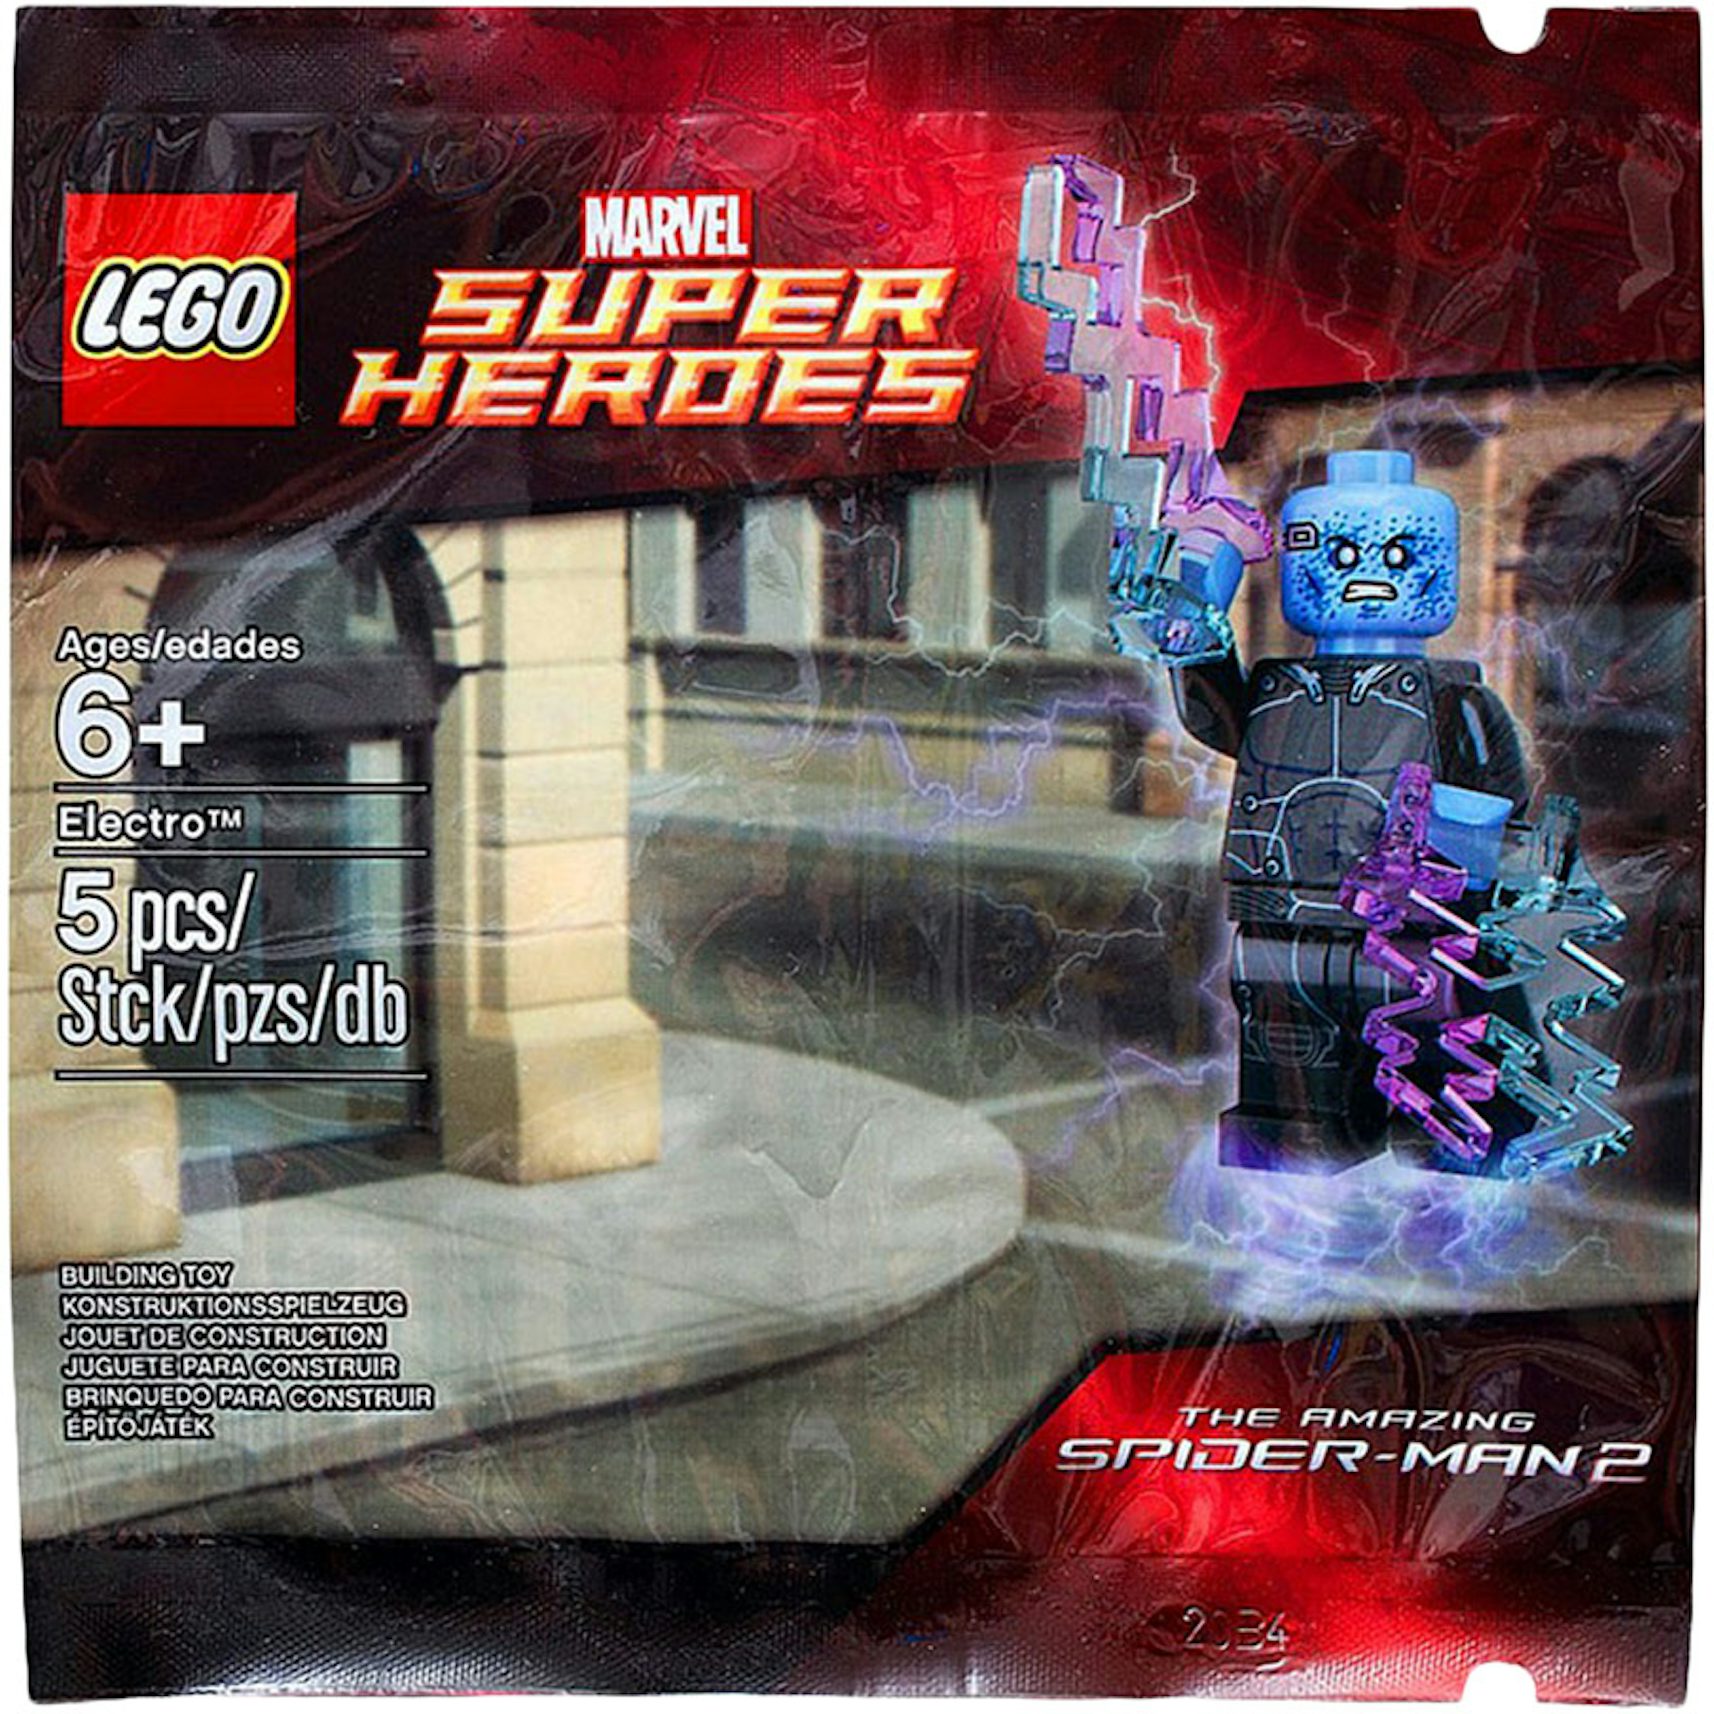 LEGO Marvel Super Heroes - Plugged In